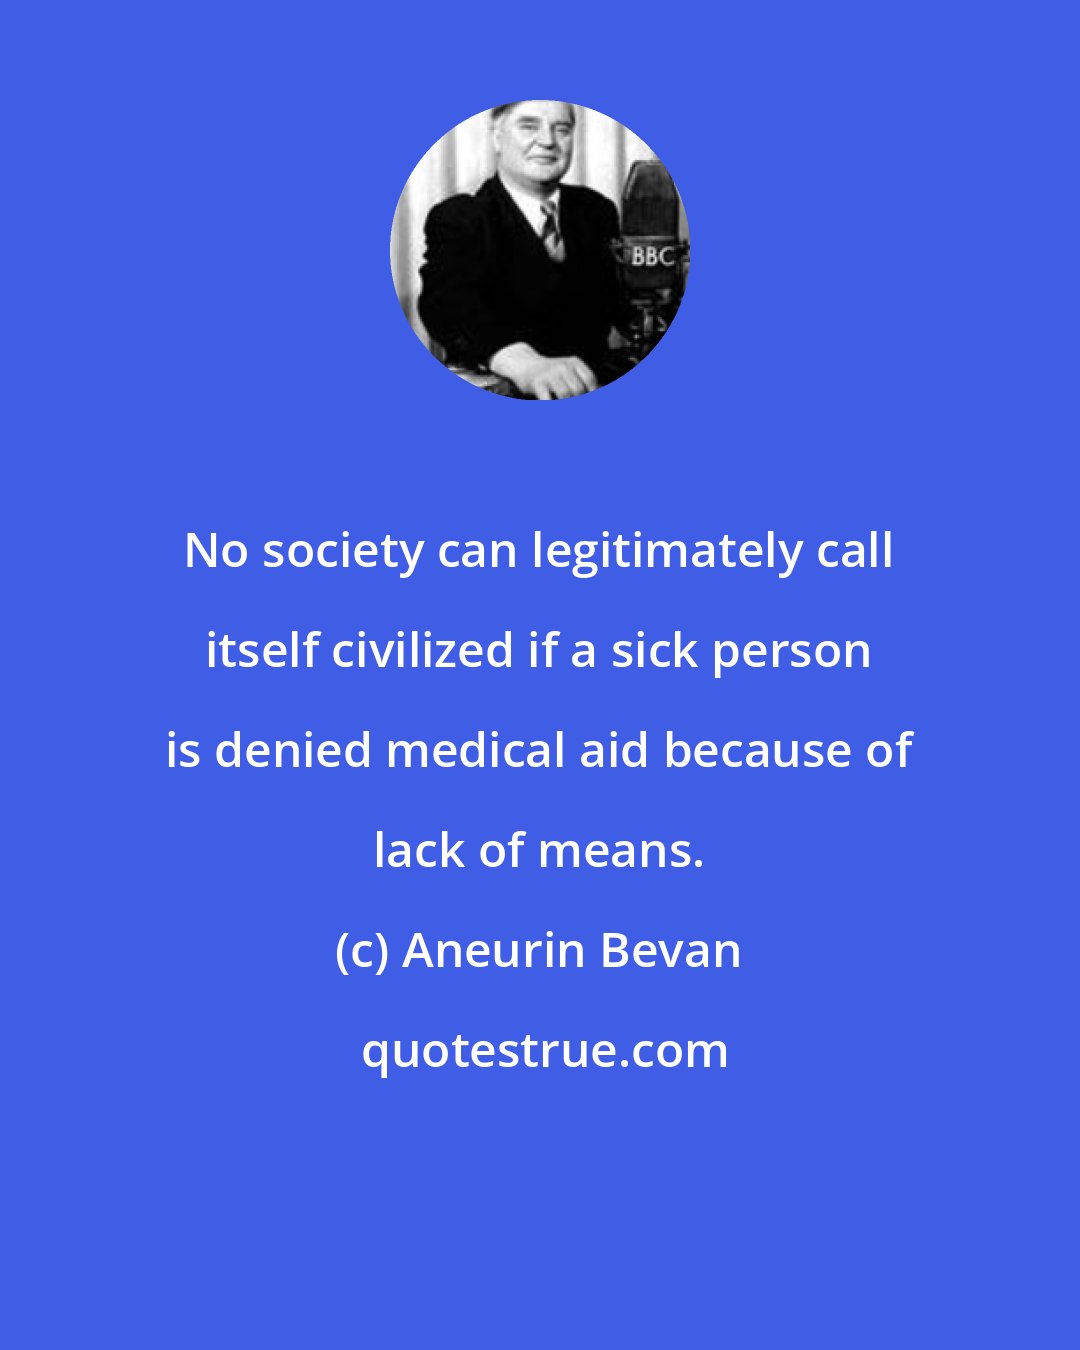 Aneurin Bevan: No society can legitimately call itself civilized if a sick person is denied medical aid because of lack of means.